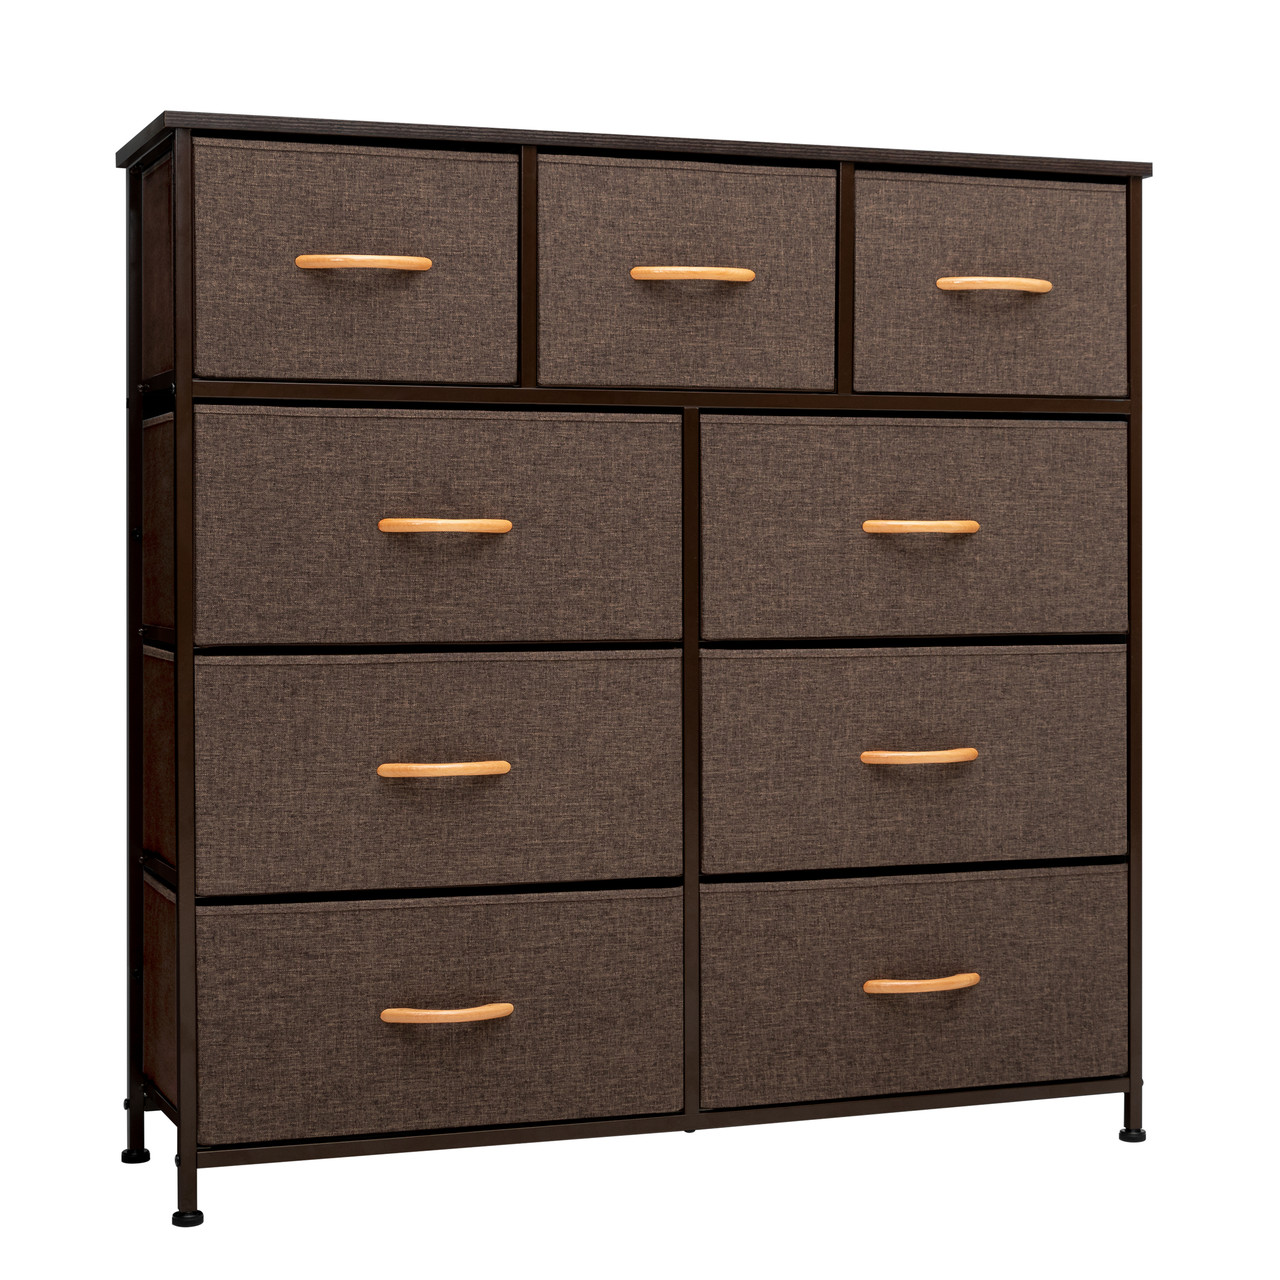 Details about   3 Drawers Home Storage Cabinet Dressers Tower Wood Top Removable Steel Brown 